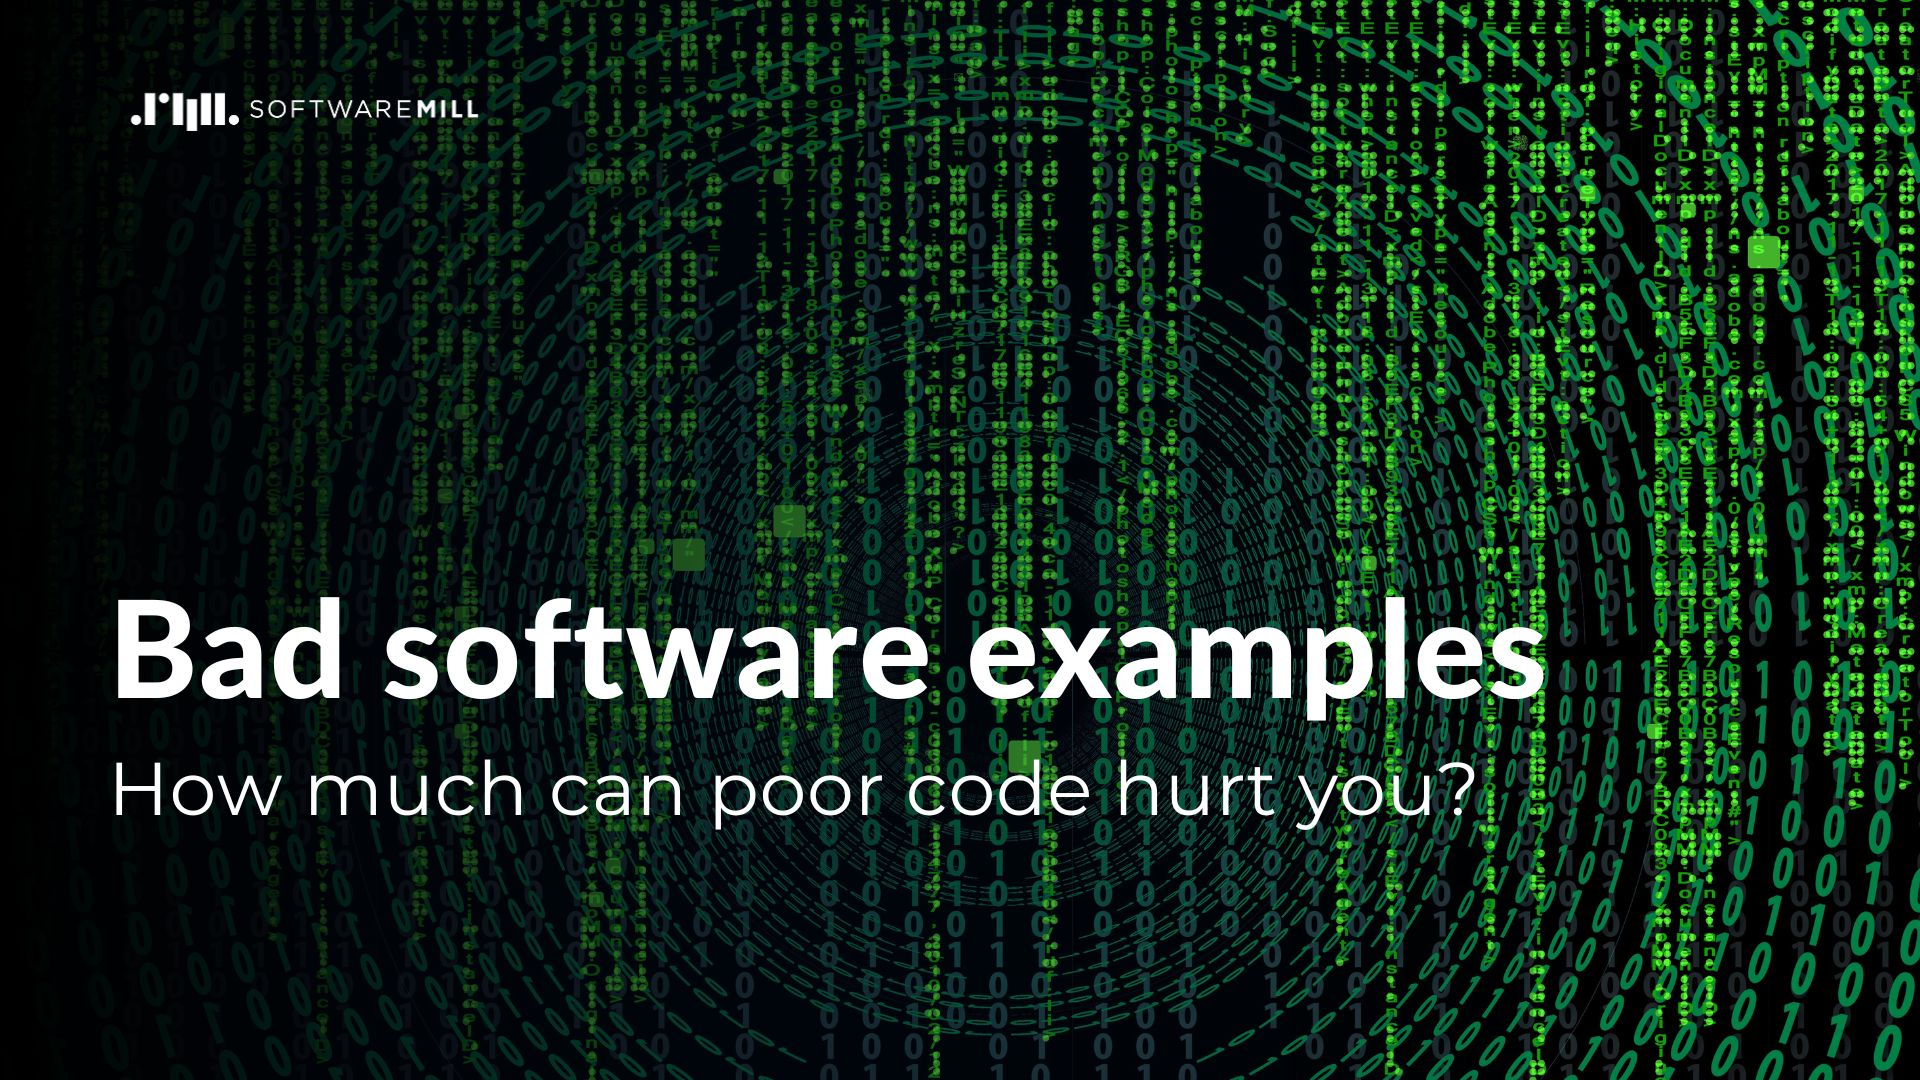 Bad software examples - how much can poor code hurt you? webp image